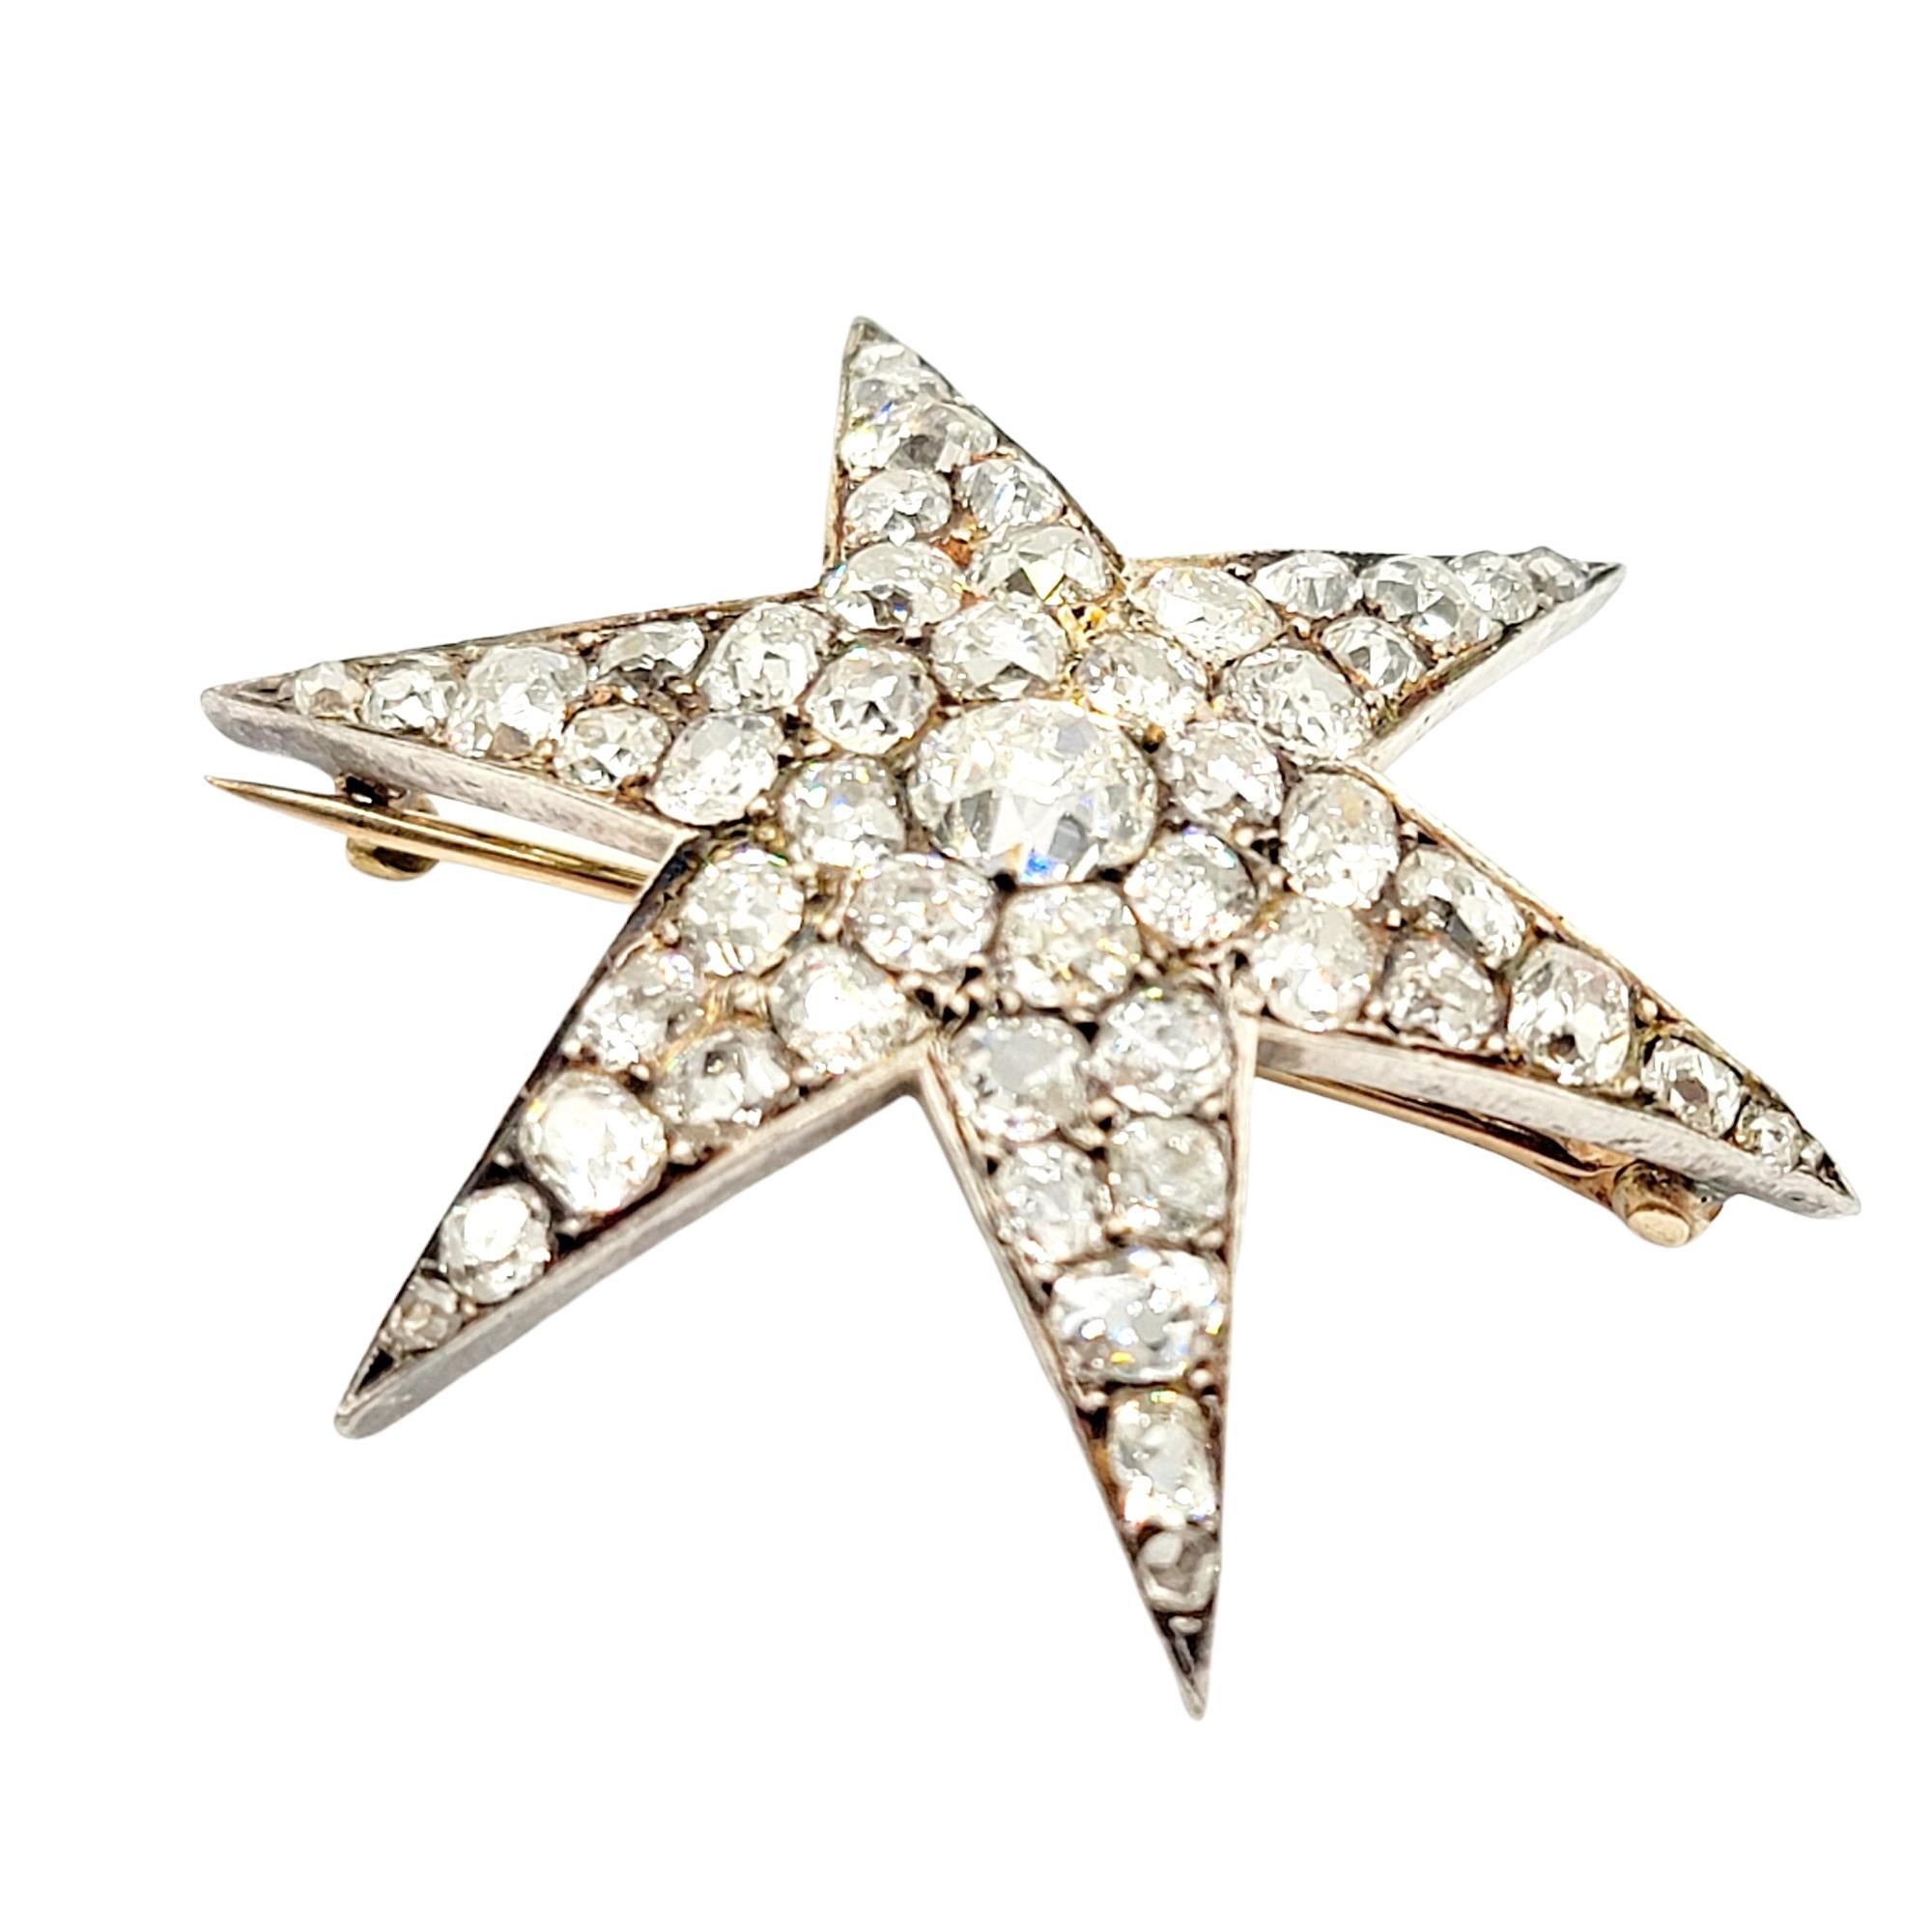 This extraordinary custom one of a kind diamond star brooch will be a lovely addition to your fine jewelry collection. This is a timeless brooch with exquisite fine details from the Victorian Era. 

The brooch is made of 14 karat yellow gold clad